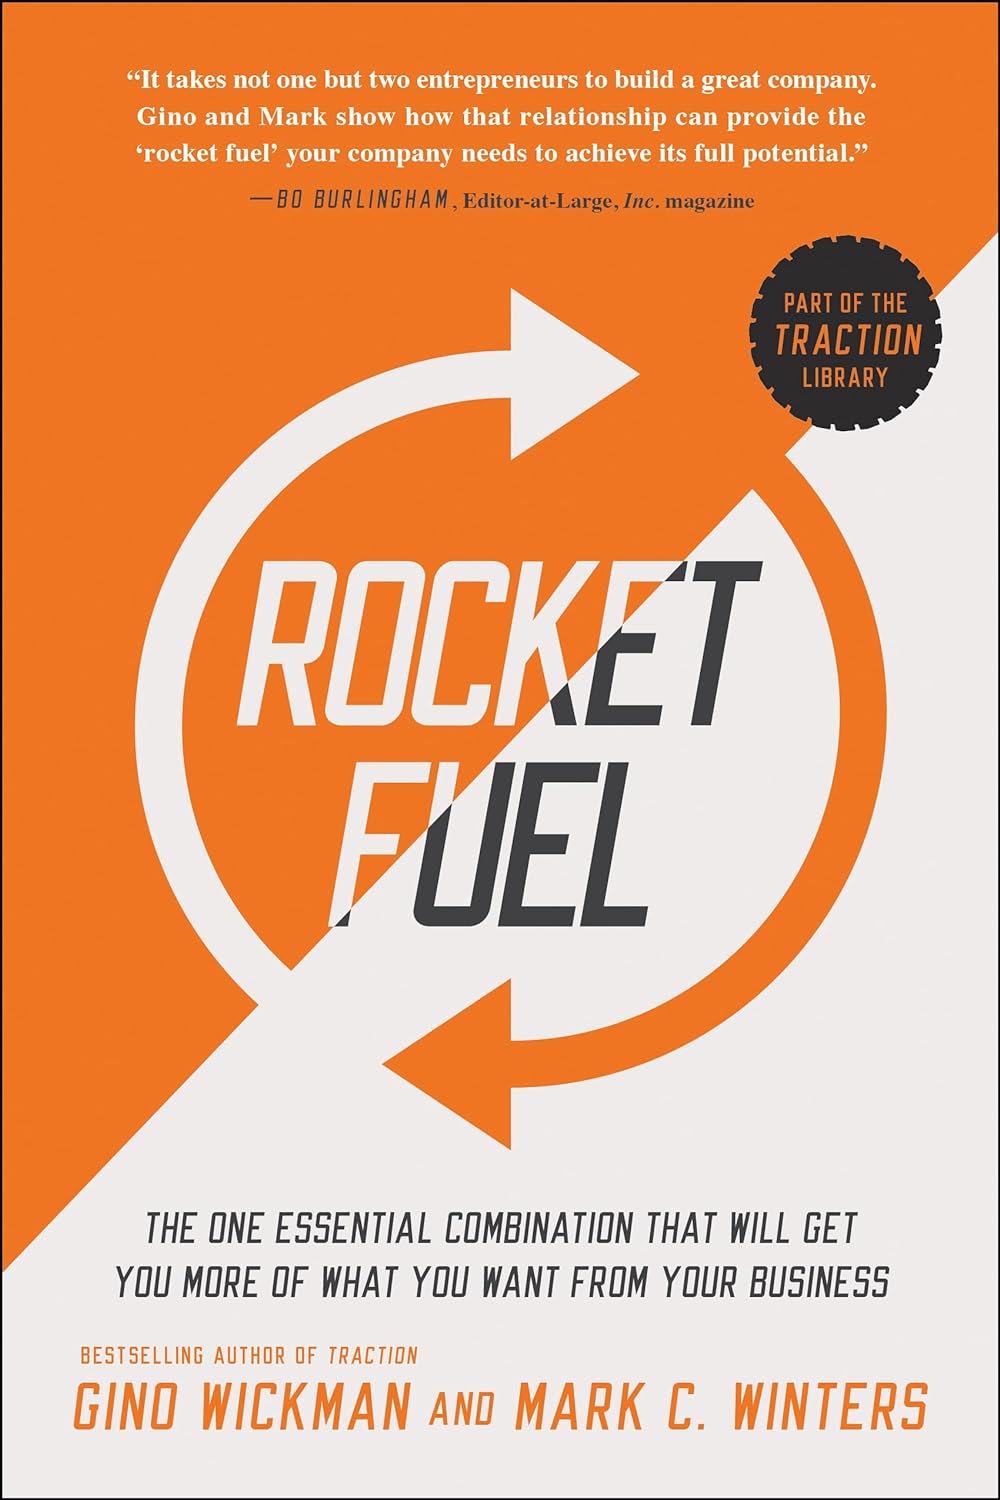 Gino Wickman _ Mark C. Winters - Rocket Fuel. The One Essential Combination That Will Get You More of What You Want from Your Business